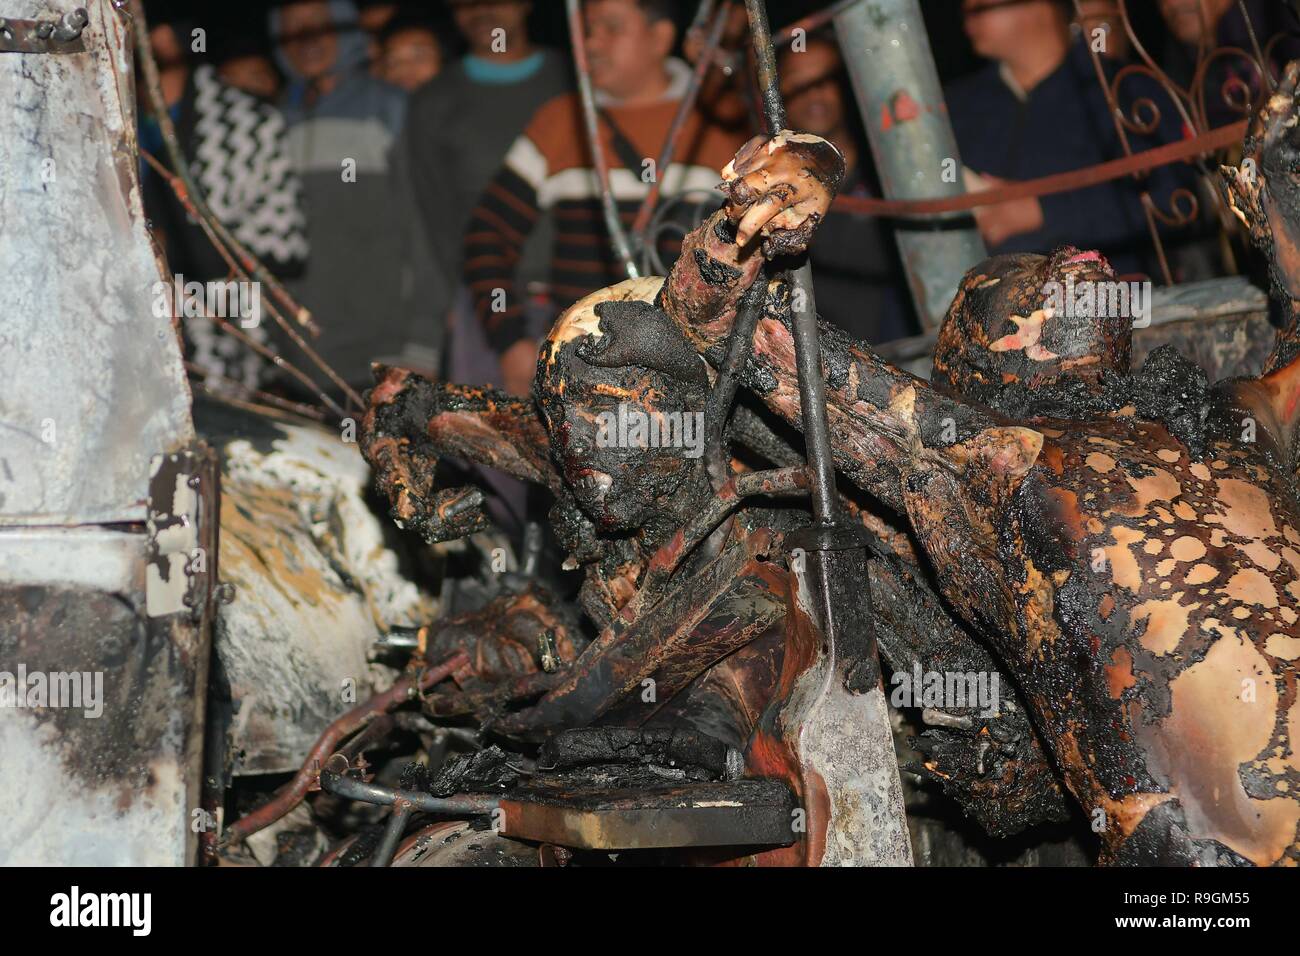 (EDITOR'S NOTE: IMAGE DEPICTS DEATH) Burnt bodies seen at the scene of the accident. Tragic road mishap at Amtali, 3 charred to death, 4 injured when two vehicles crushed face on resulting into a fire. Stock Photo